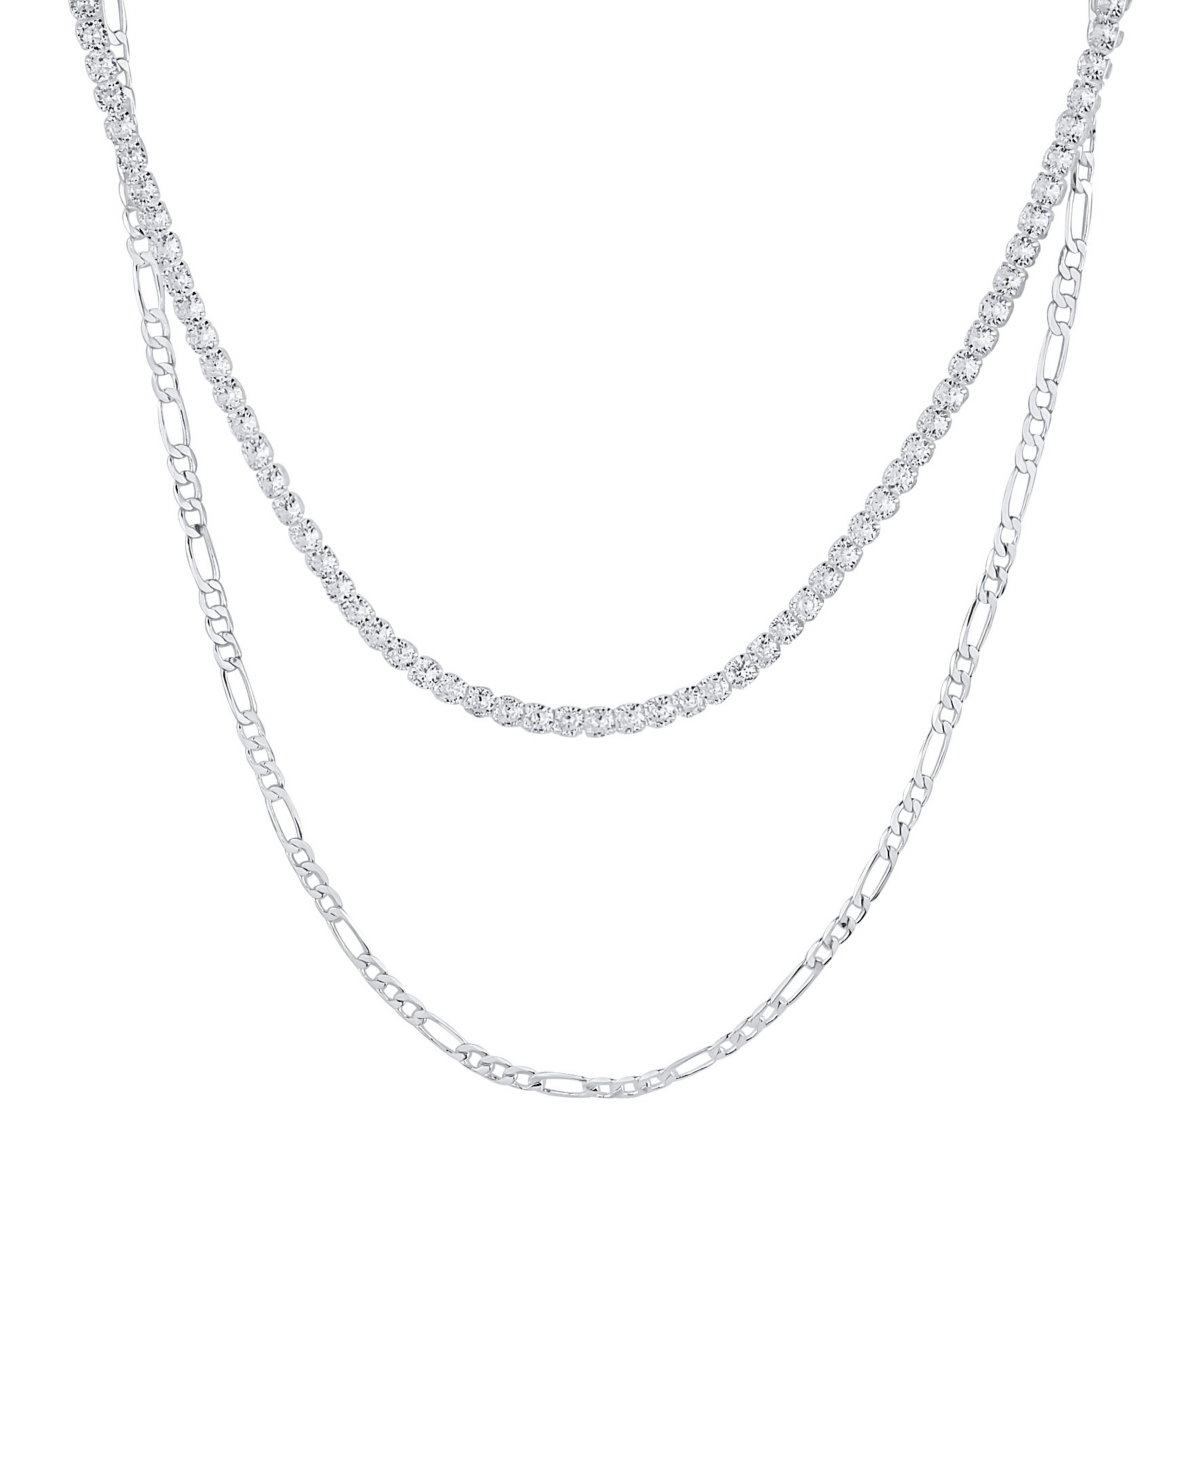 Double Row Chain with Cubic Zirconia Tennis Necklace and Clip Chain Necklace - Fine Silver Plated